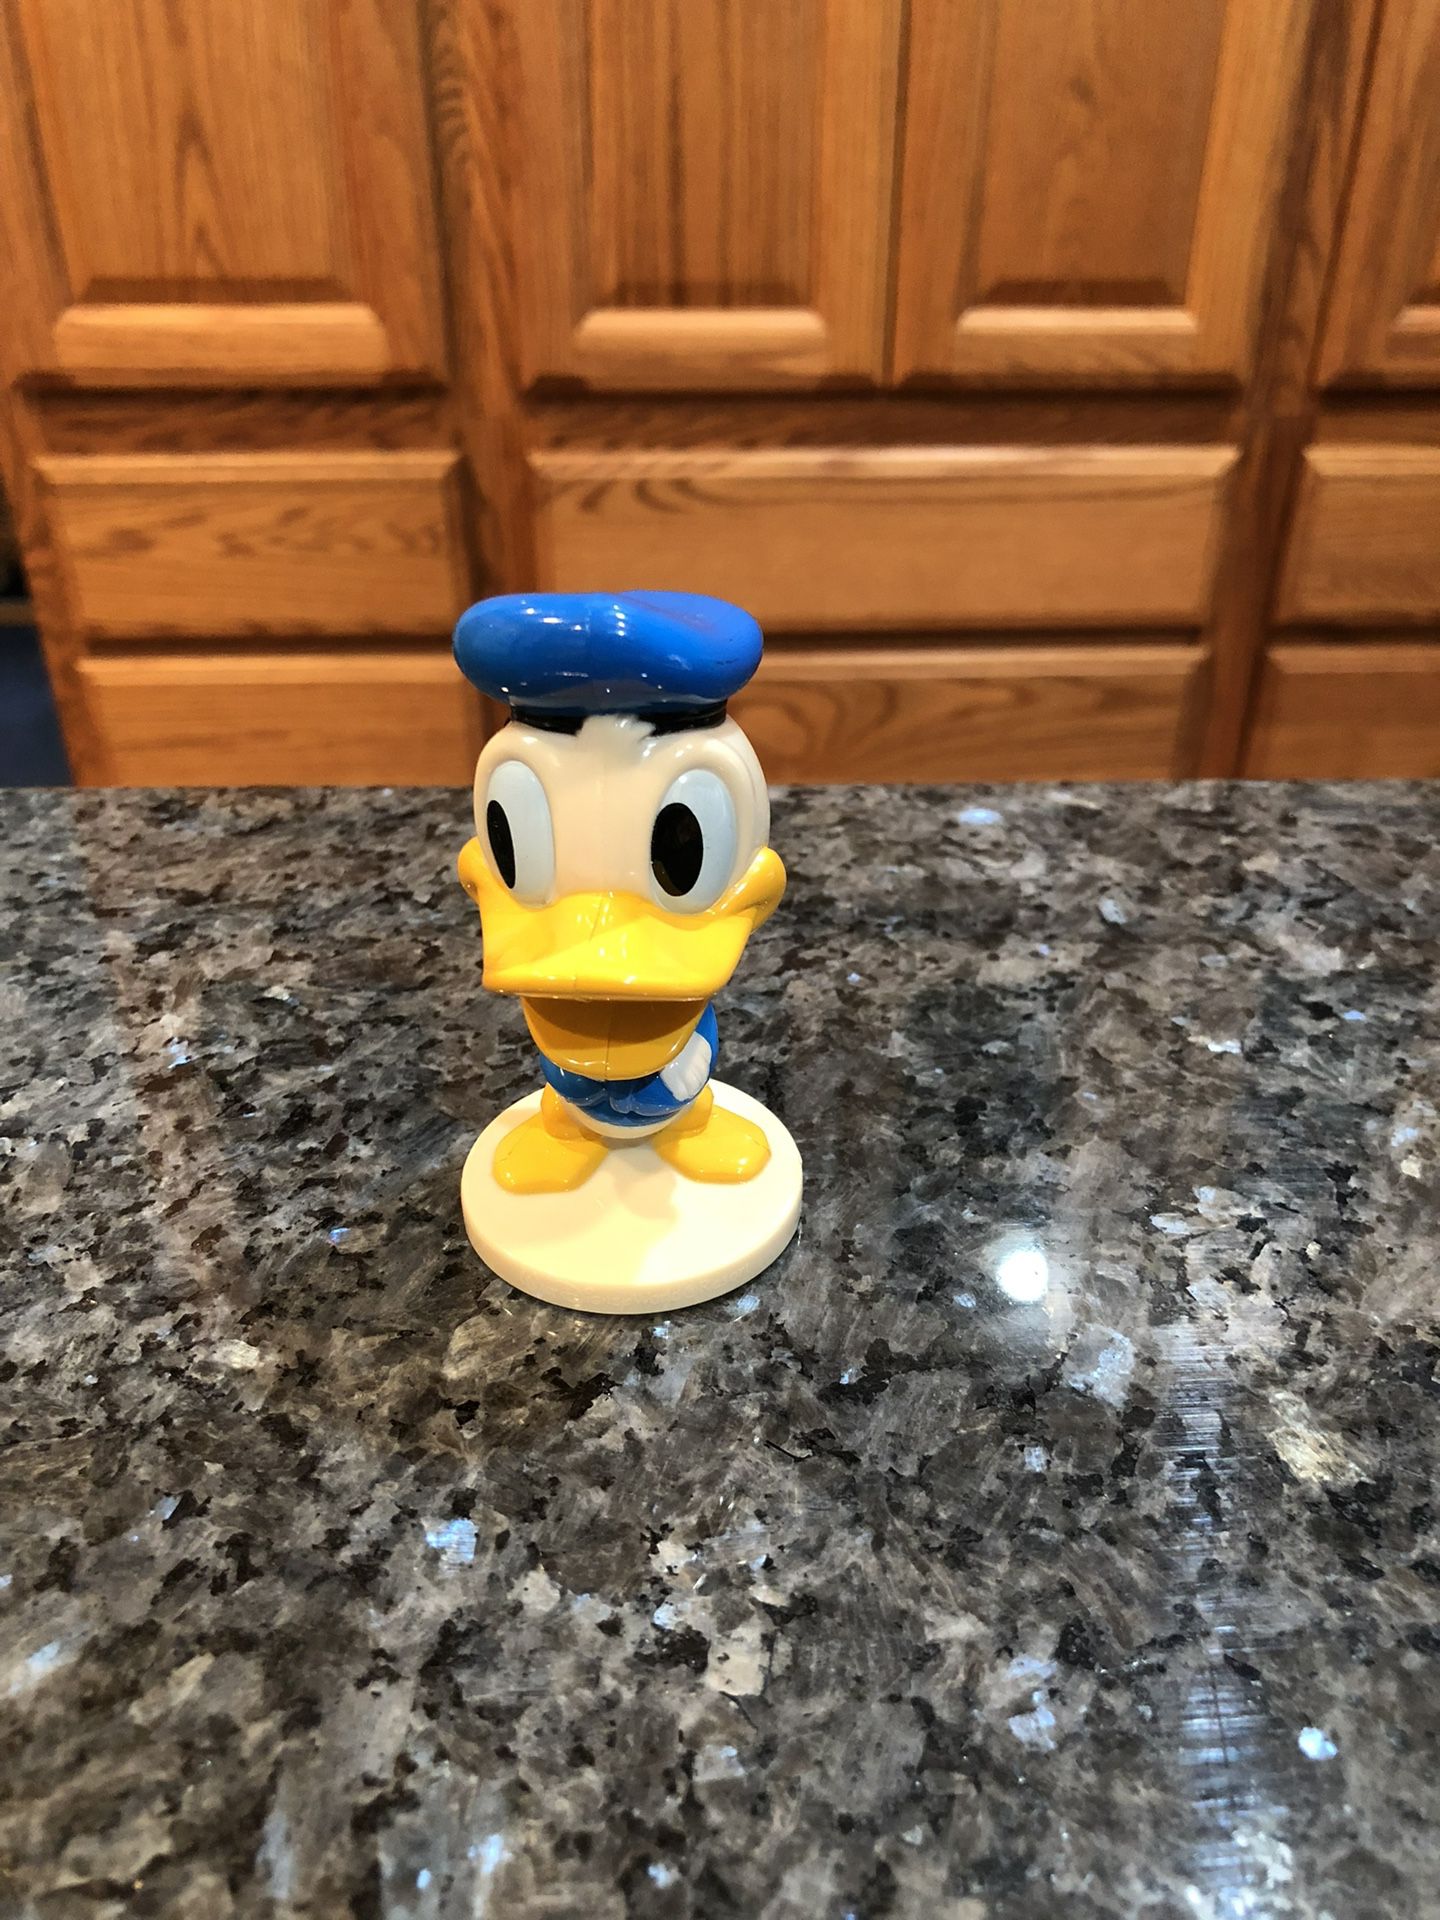 Disney Donald Duck Plastic Nodder Bobblehead Figure By Kellogg Cereal.  Vintage Walt Disney .  Size 3 inches Tall .  Preowned 